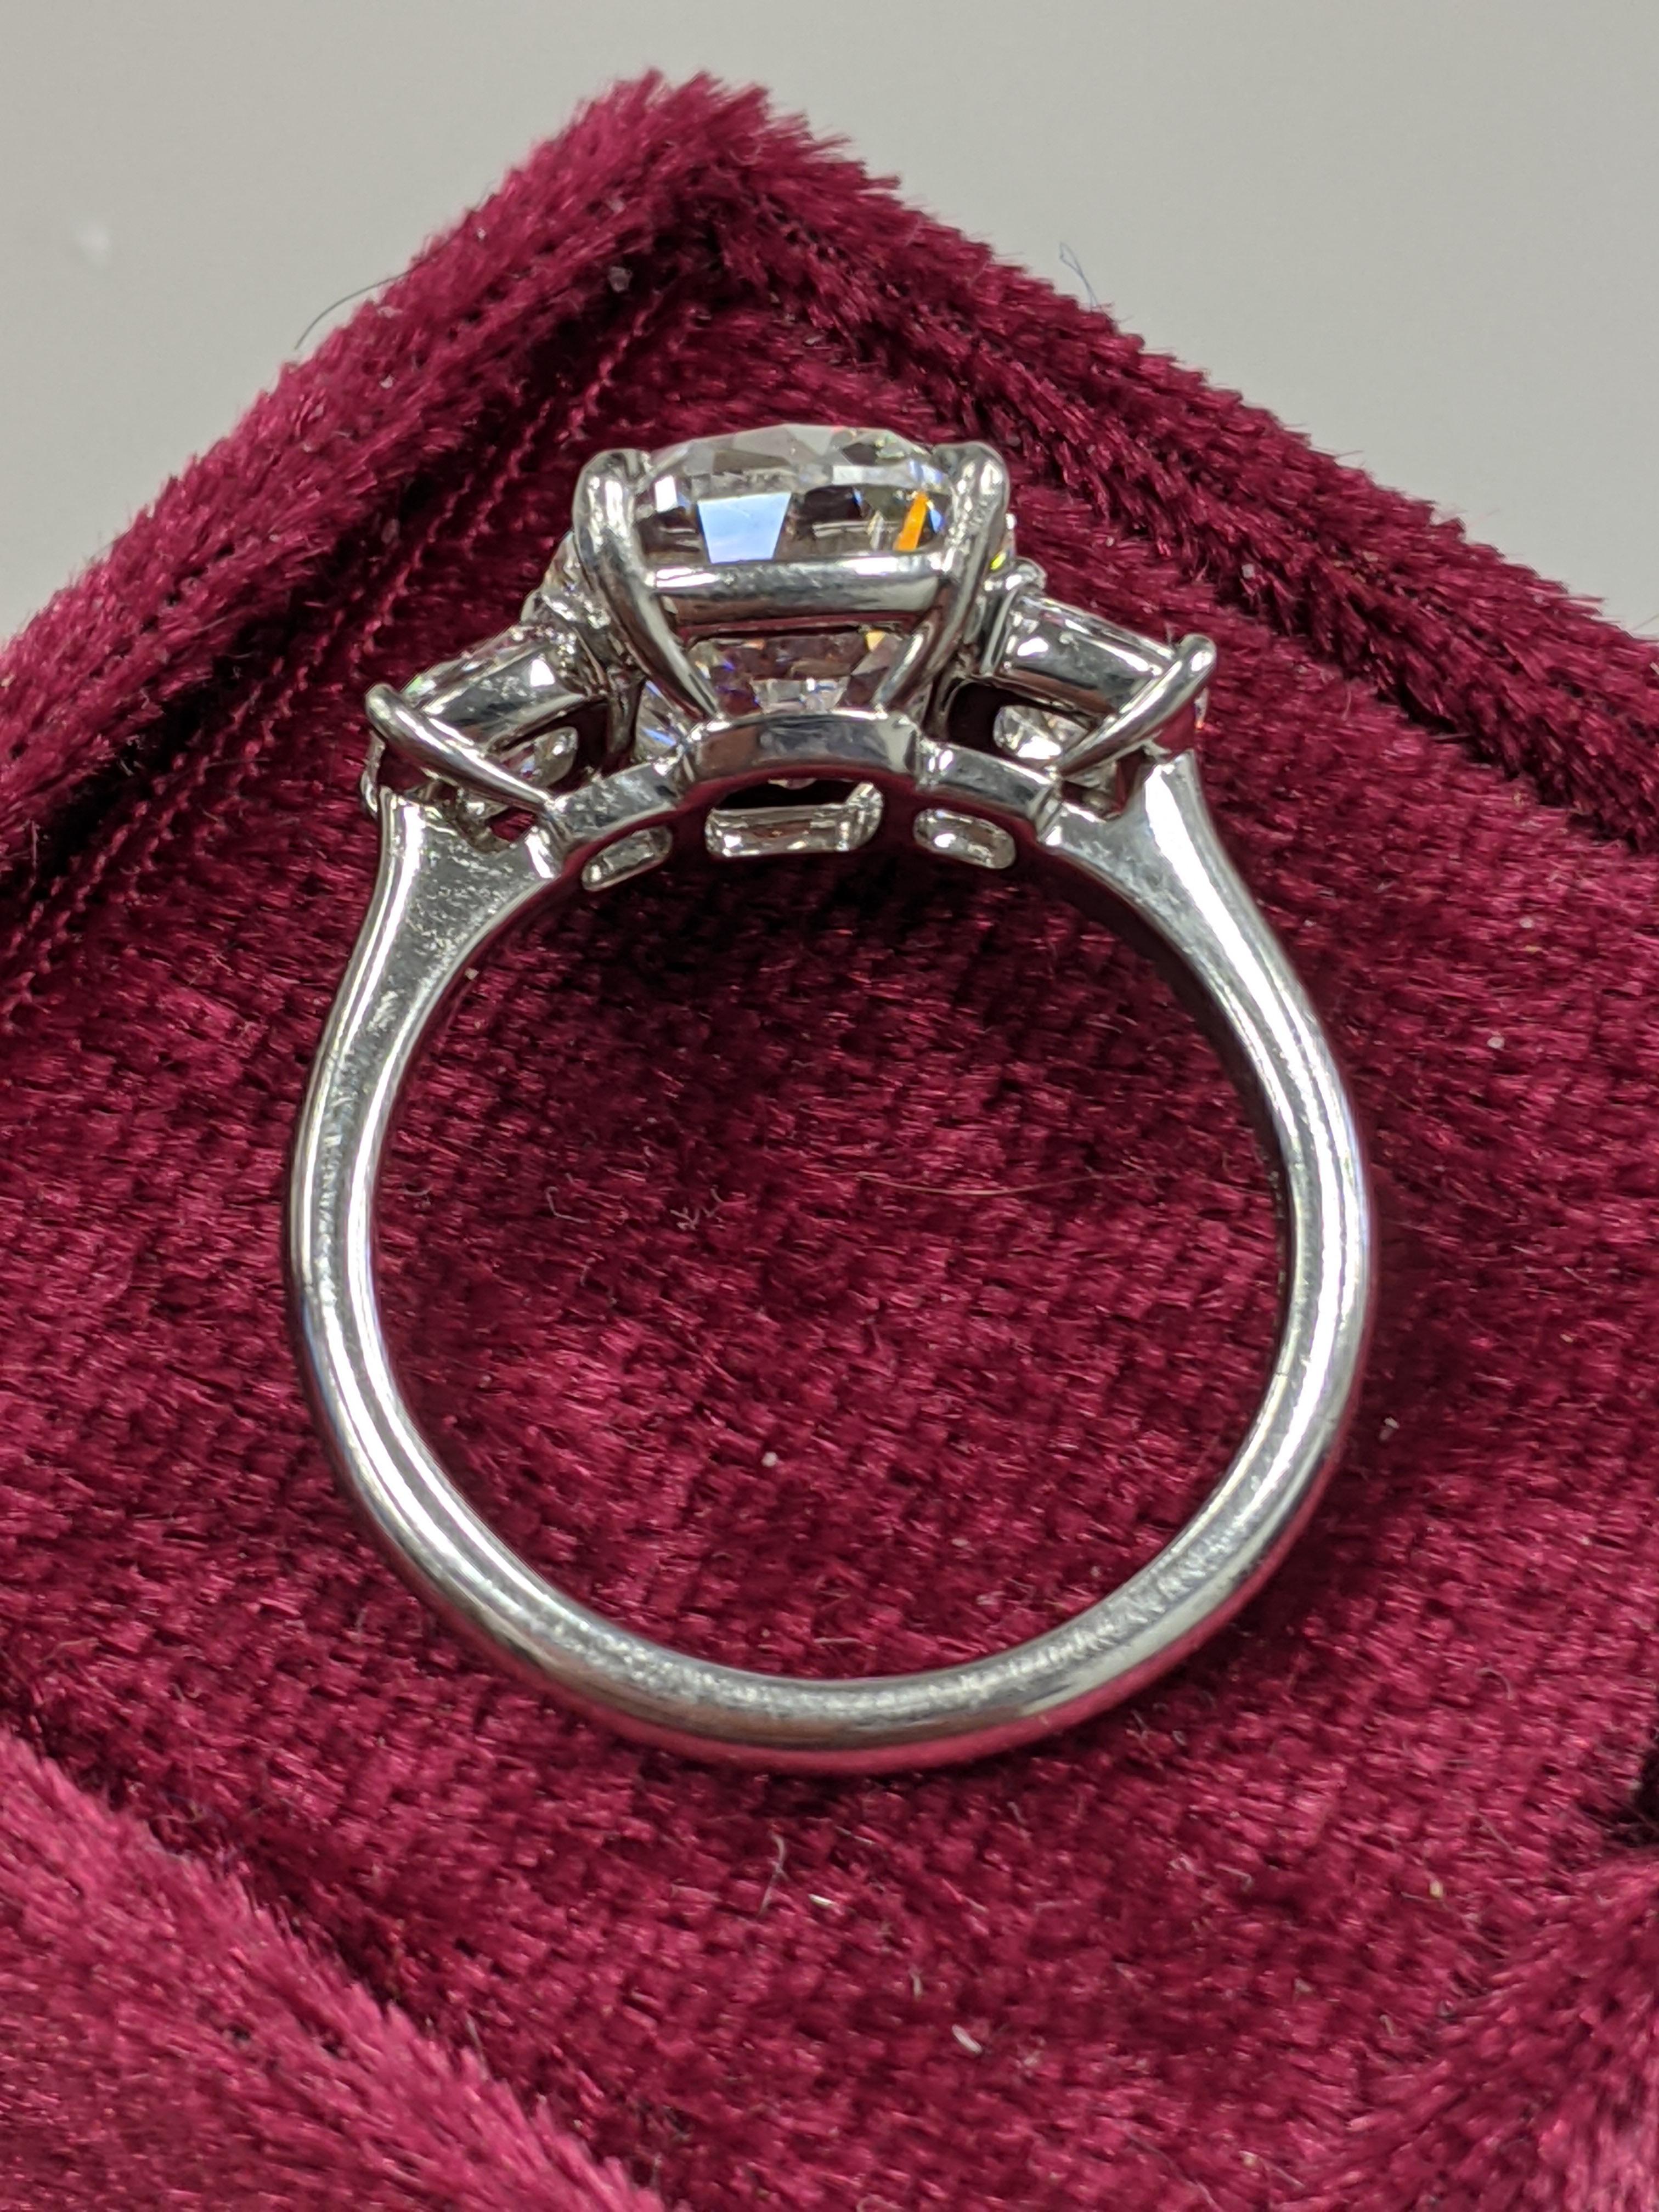 The perfect five star ring no matter where you travel internationally.  This four carat G color VS2 clarity Traditional Cushion Brilliant diamond is flanked by smaller cushions (0.60+ ctw) The mounting is platinum by one of the top setting jewelers